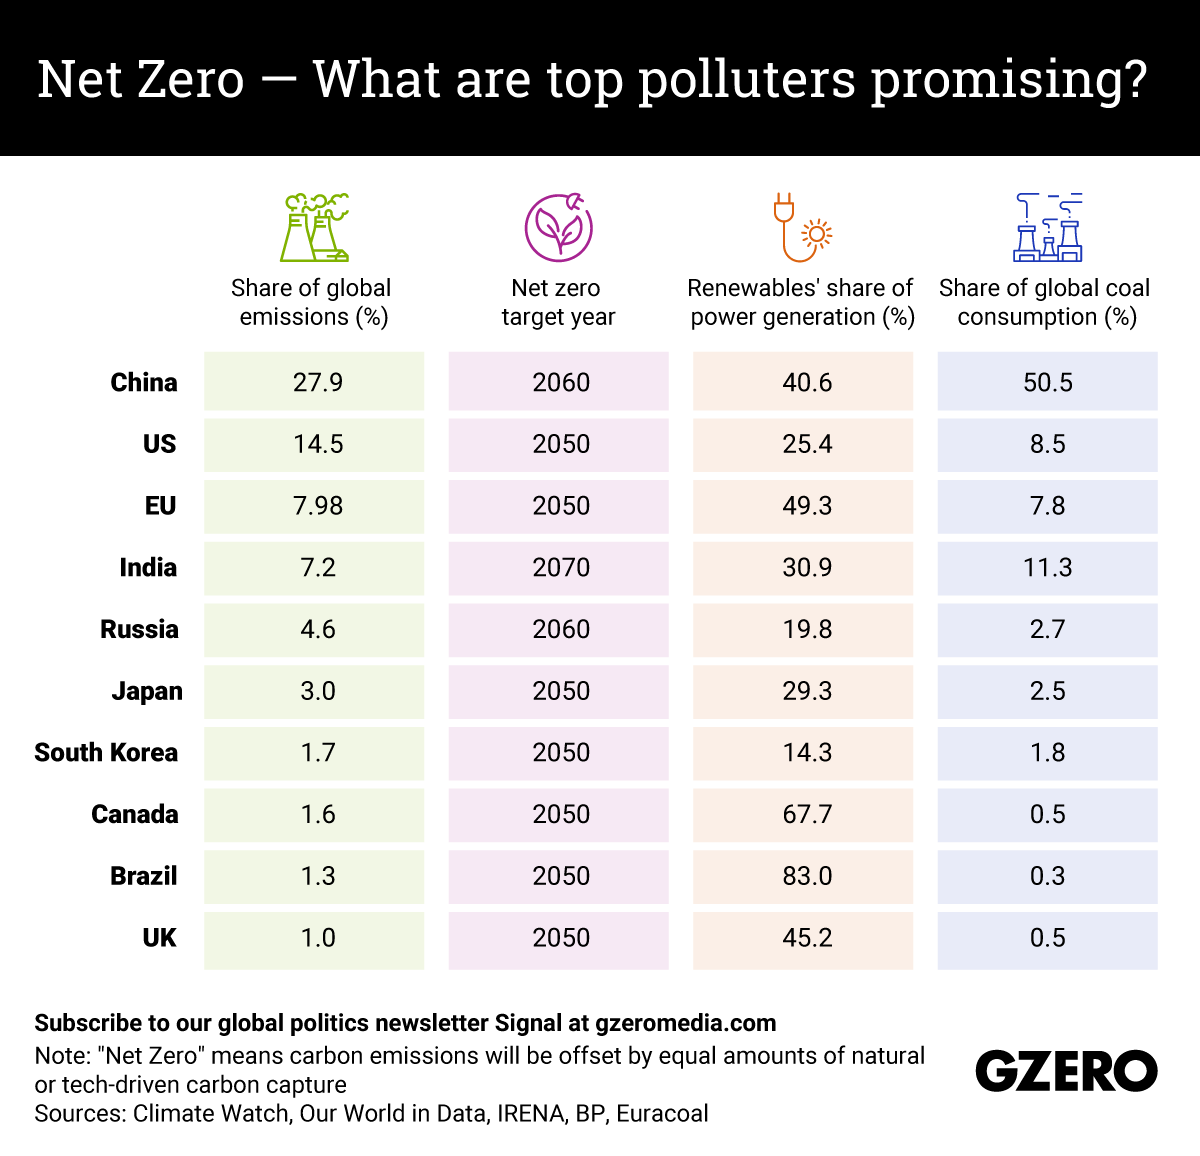 The Graphic Truth: Net Zero — What are the top polluters promising?